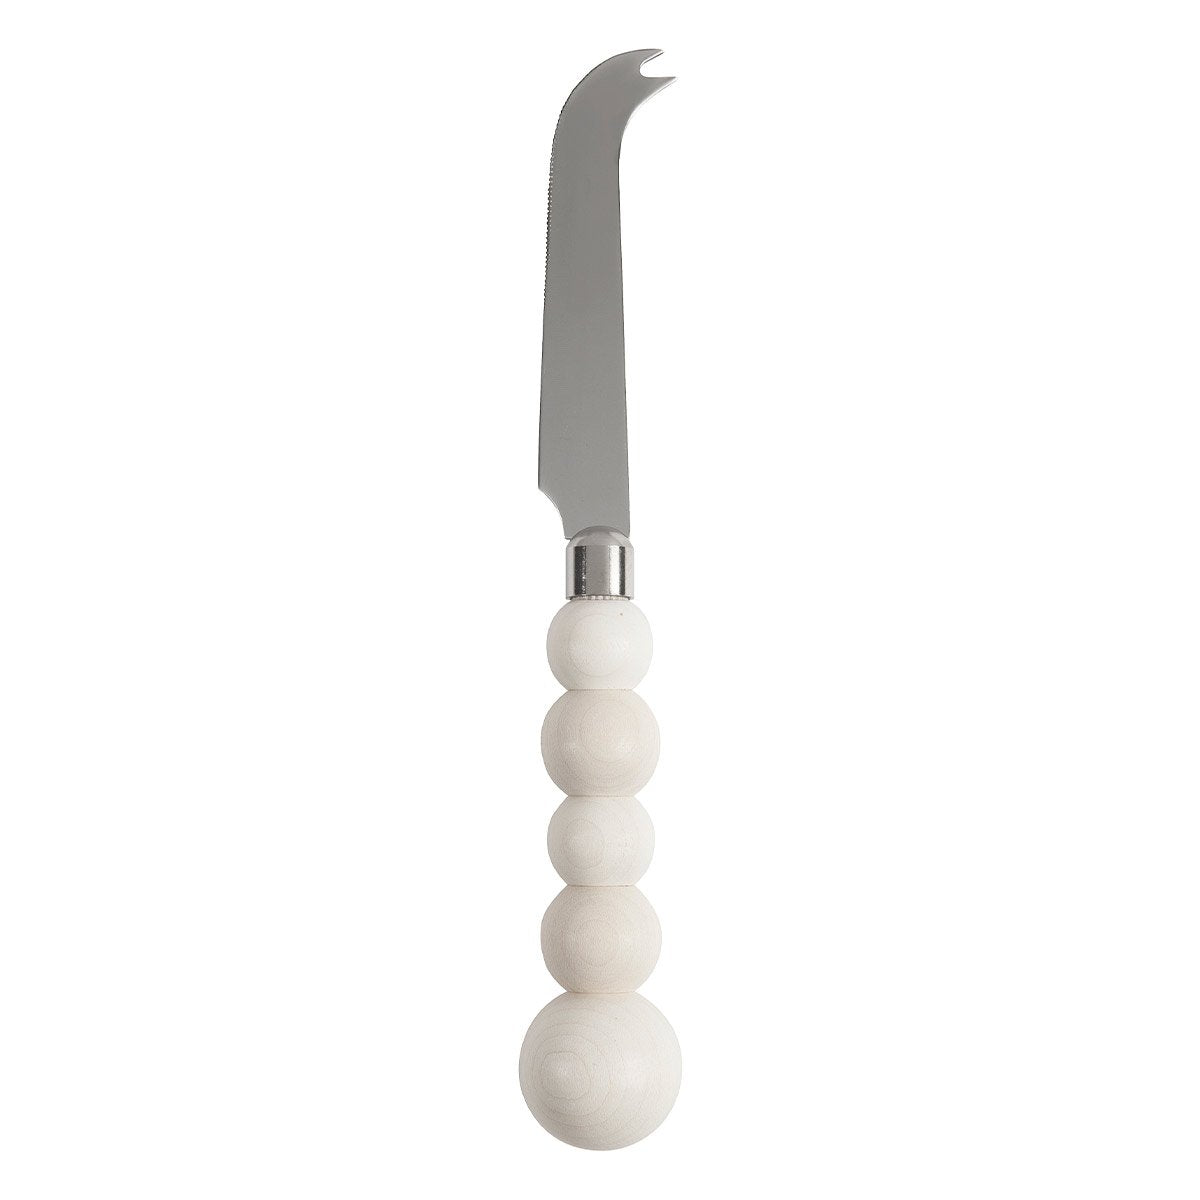 Puisto cheese knife